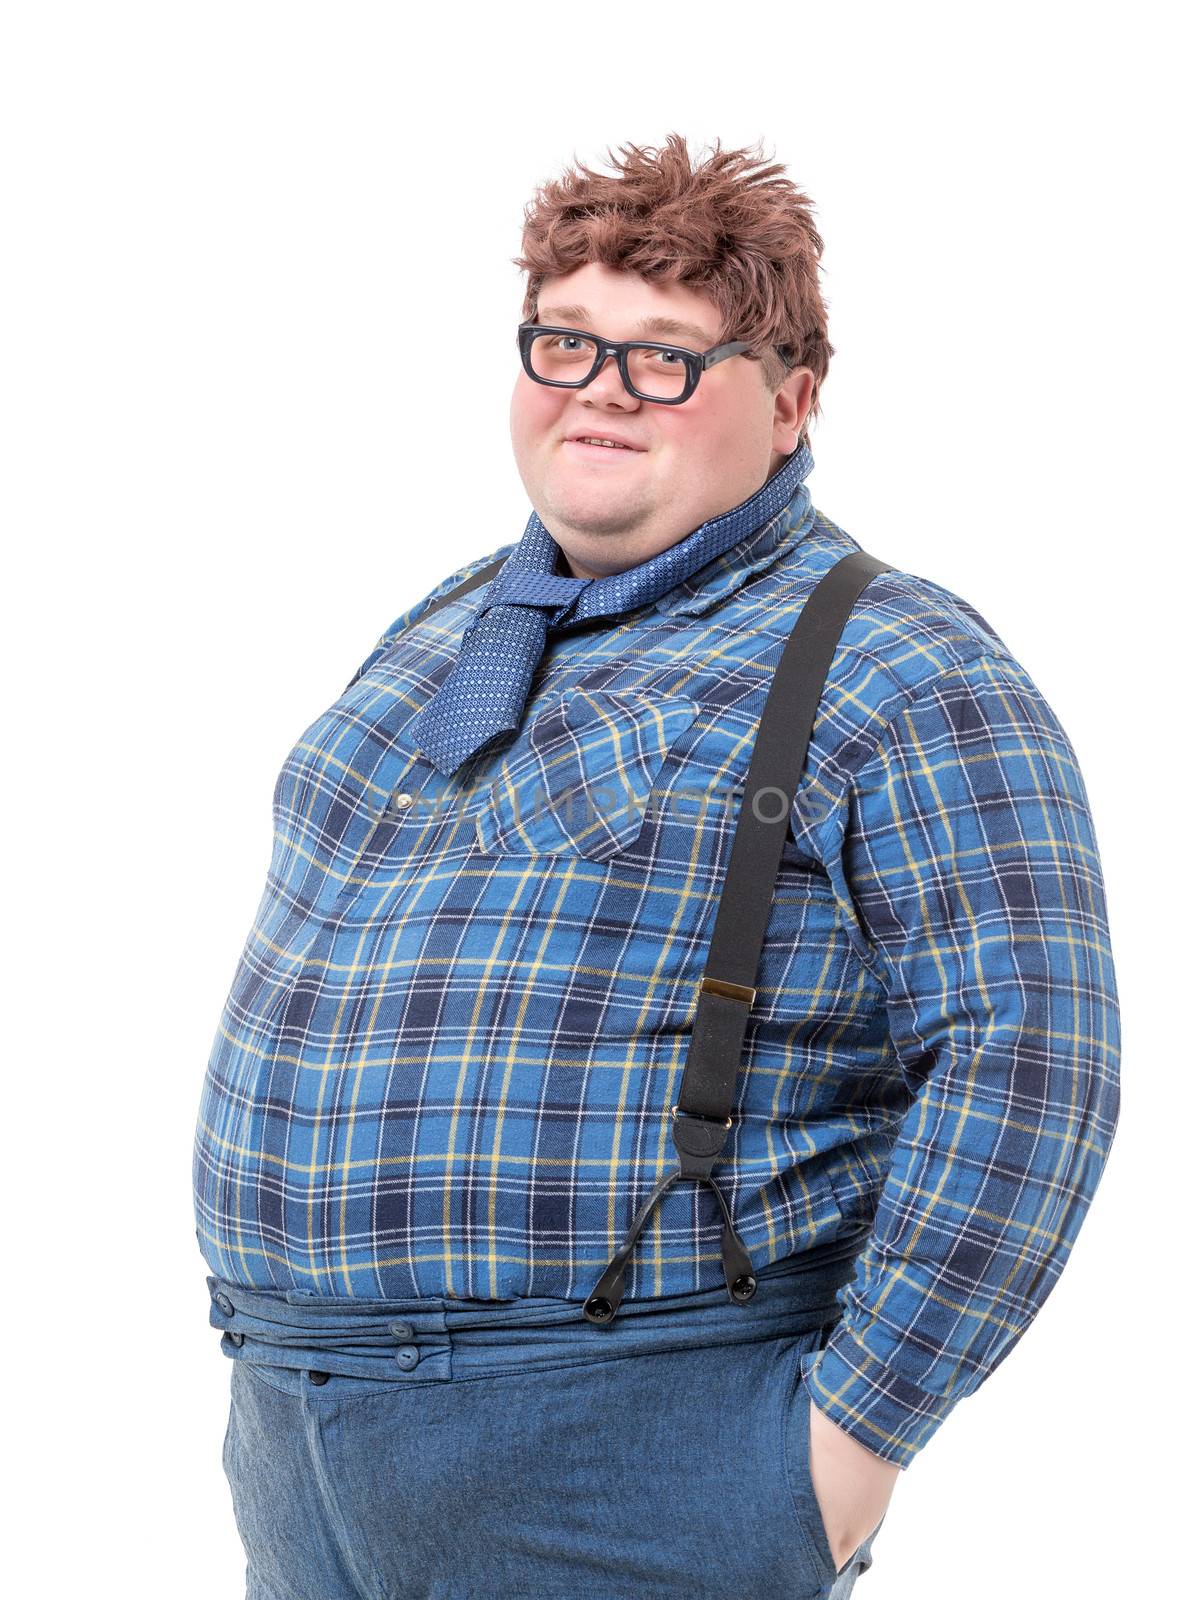 Overweight obese country yokel, on white background